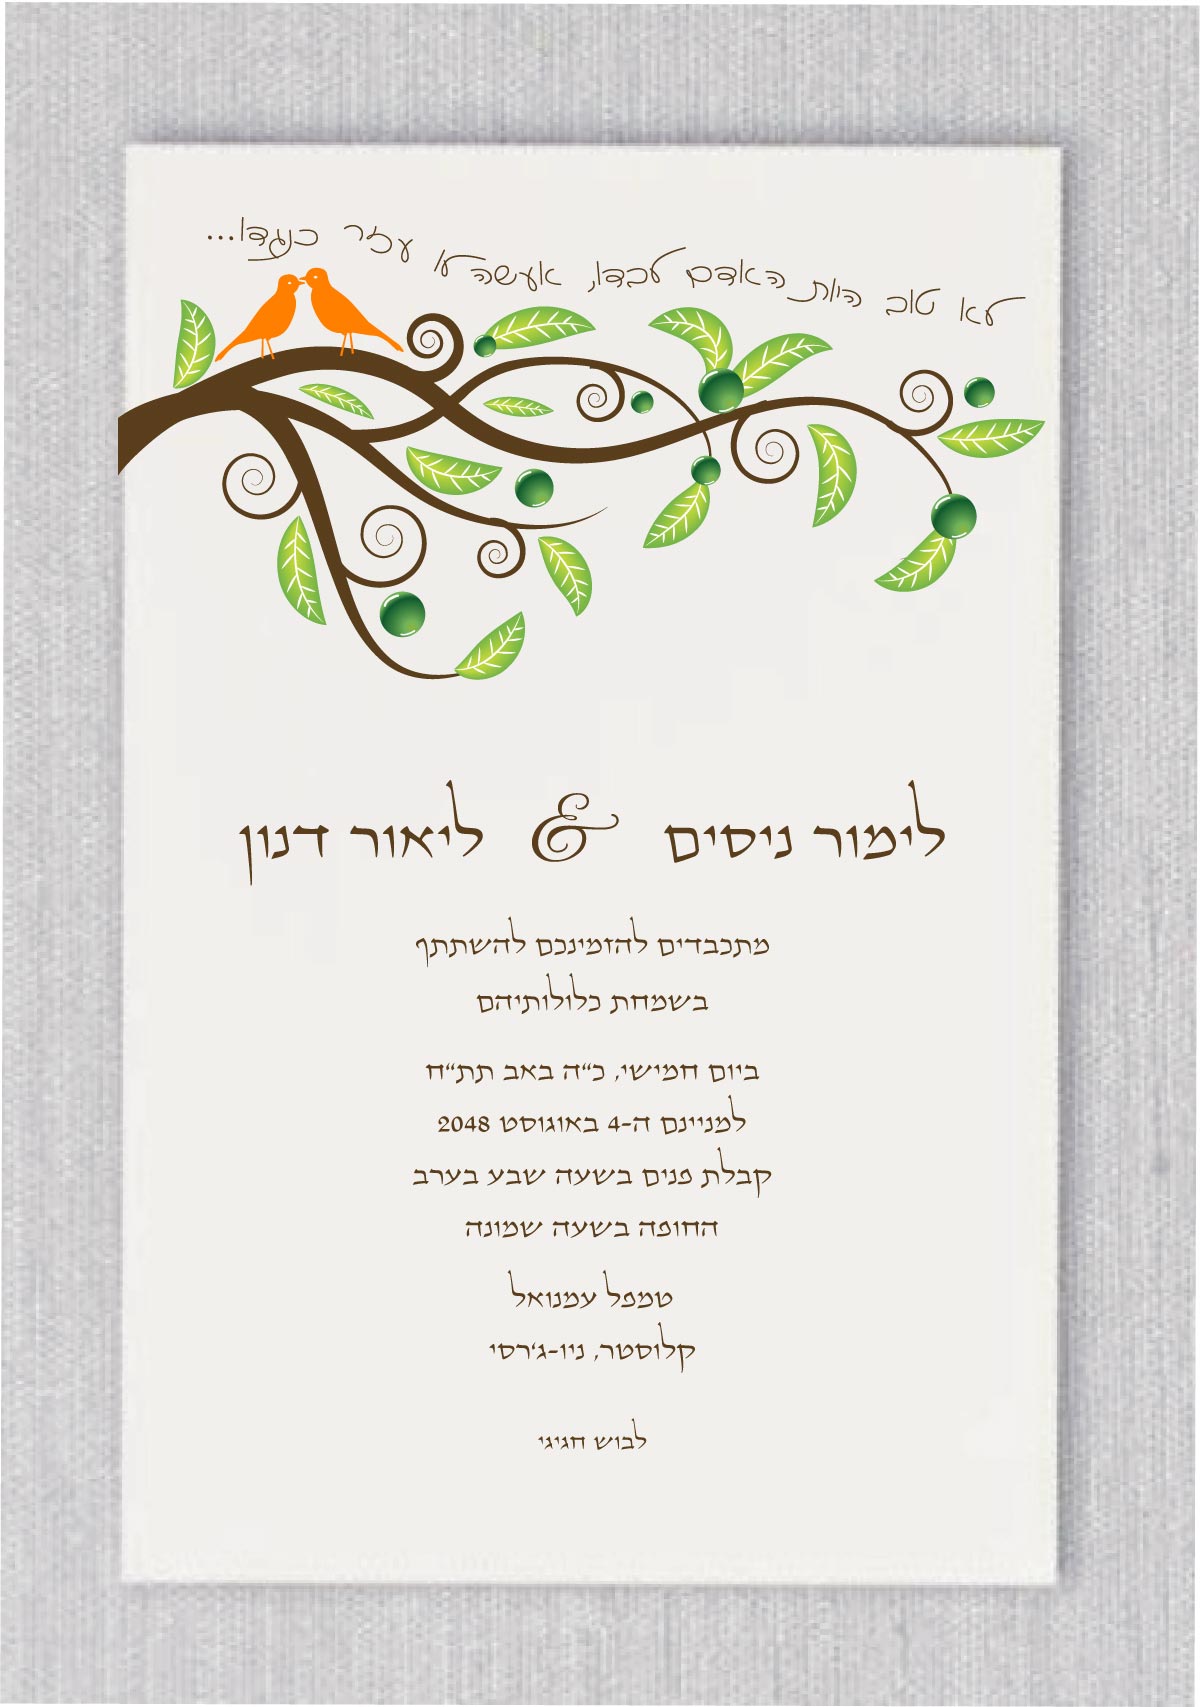 Two Birds - Hebrew Wedding Invitations feature a beautifully simple design that is sure to impress anyone who receives it. The Jewish Hebrew invitation features two birds sitting on tree branches, adorned with delicate green leaves and kissing each other. The design is further enhanced by a pair of love birds perched atop a banner that reads the unique Hebrew phrase "It is not good that the man or woman be alone." The best part is that the color of the birds can be customized to suit your preference and wedding theme. It's a perfect way to convey your love and commitment to each other and invite your guests to share in your special day.